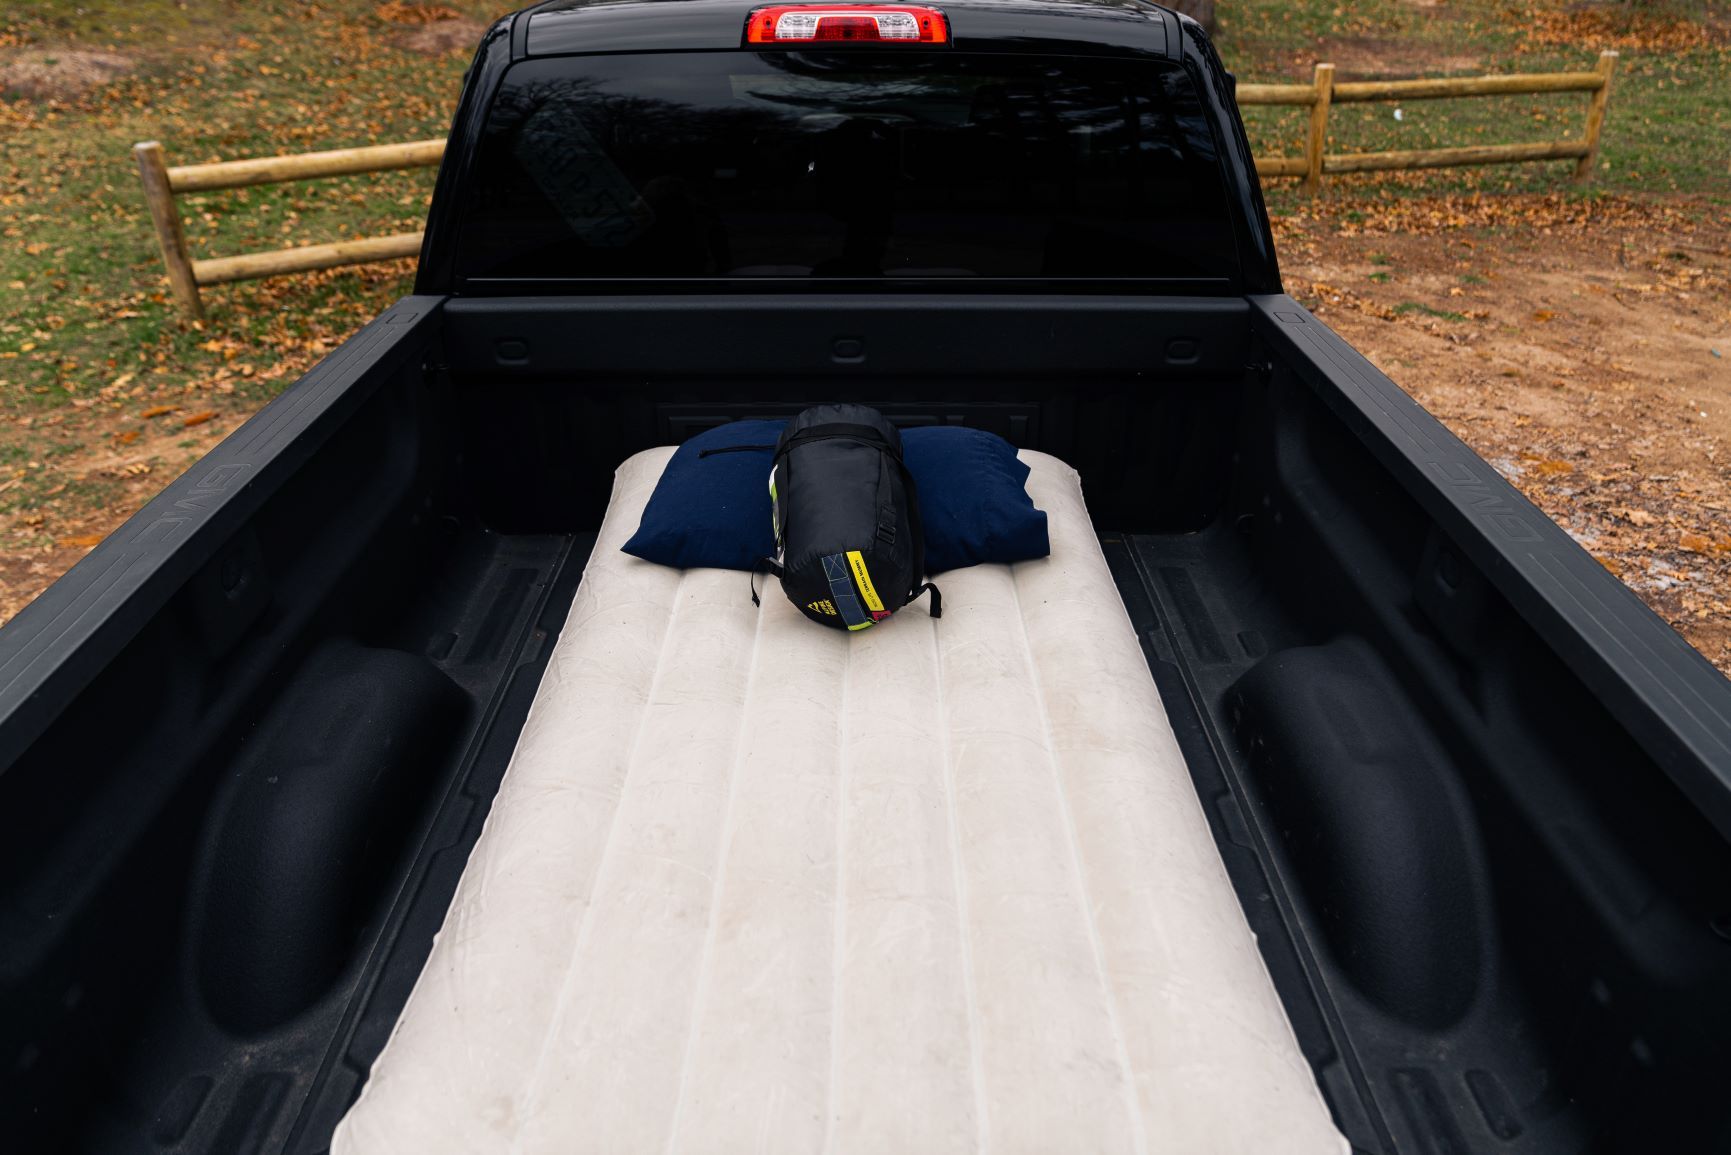 transporting a mattress in a truck bed